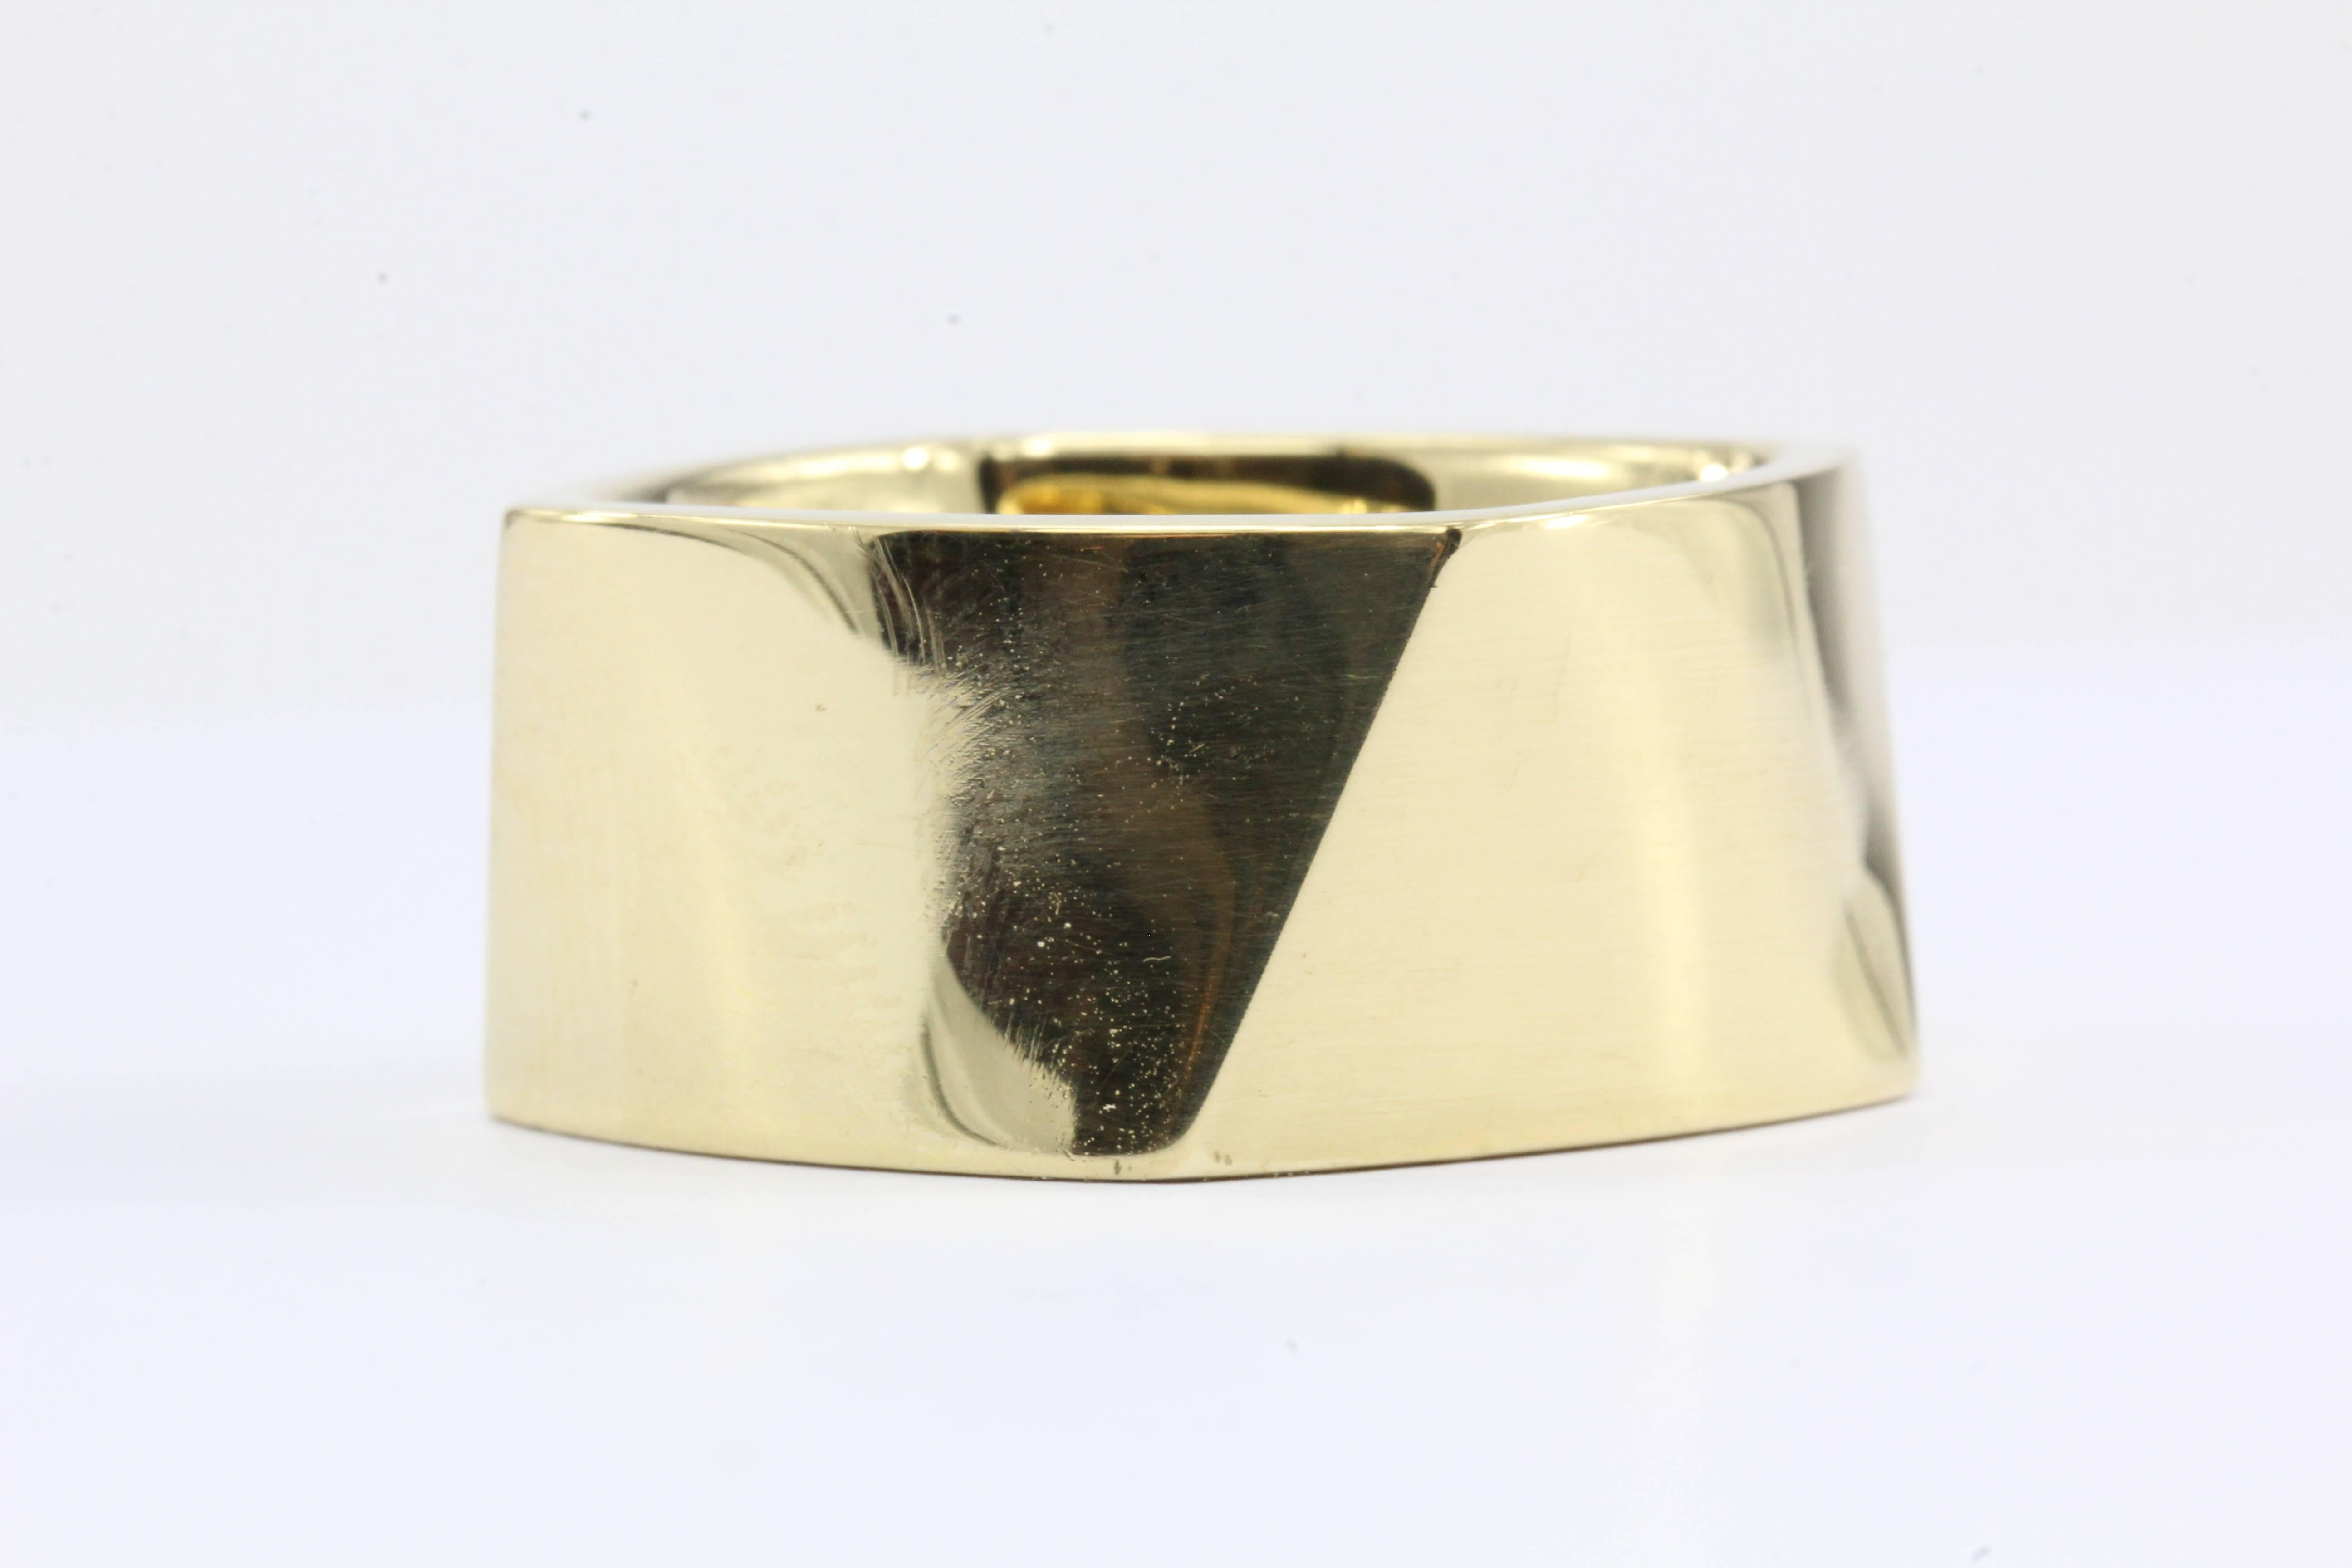 Tiffany & Co 18K Gold Frank Gehry Torque Ring Band 12mm Size 10

Era: Contemporary

Hallmarks: T&Co Gehry 750

Composition: 18k yellow gold

Ring Measurement: 12mm wide

Ring Size: 9.5 - 10

Ring Weight: 26 grams

Ring Condition: excellent gently